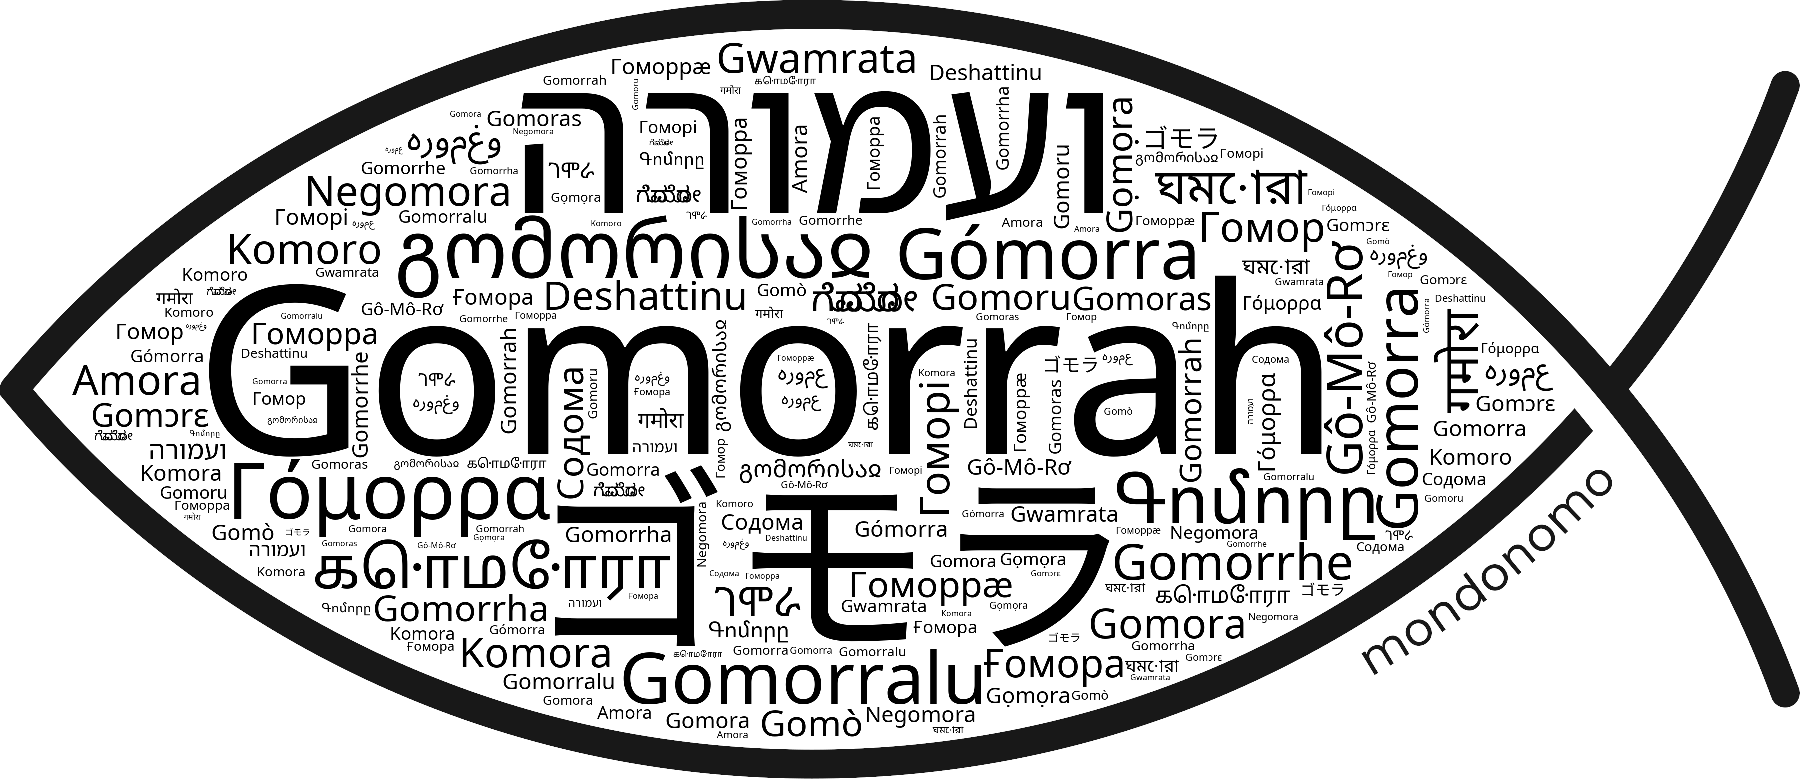 Name Gomorrah in the world's Bibles